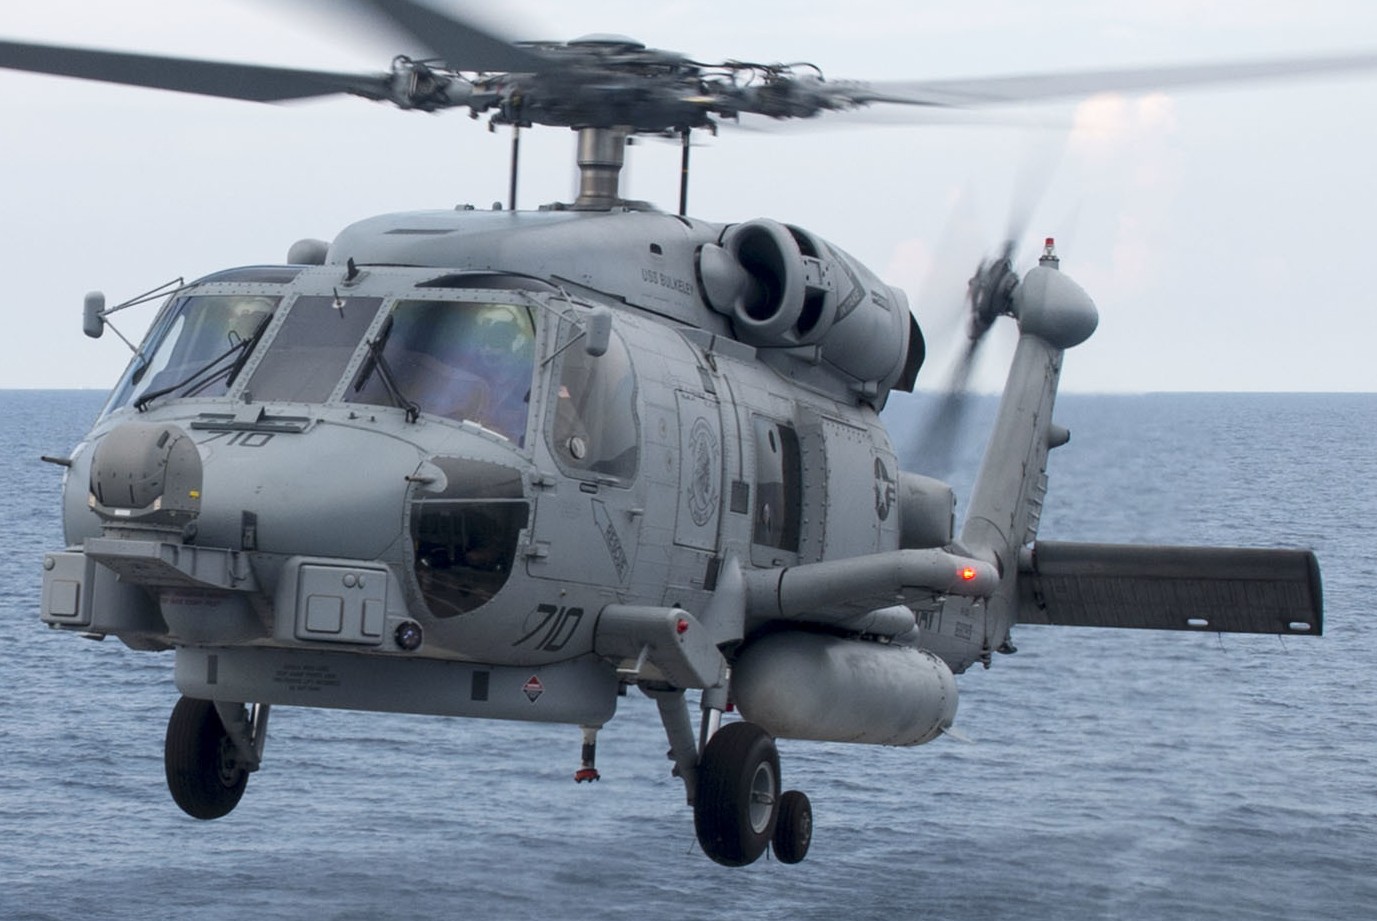 hsm-72 proud warriors helicopter maritime strike squadron mh-60r seahawk carrier air wing cvw-7 ddg-84 uss bulkeley 22